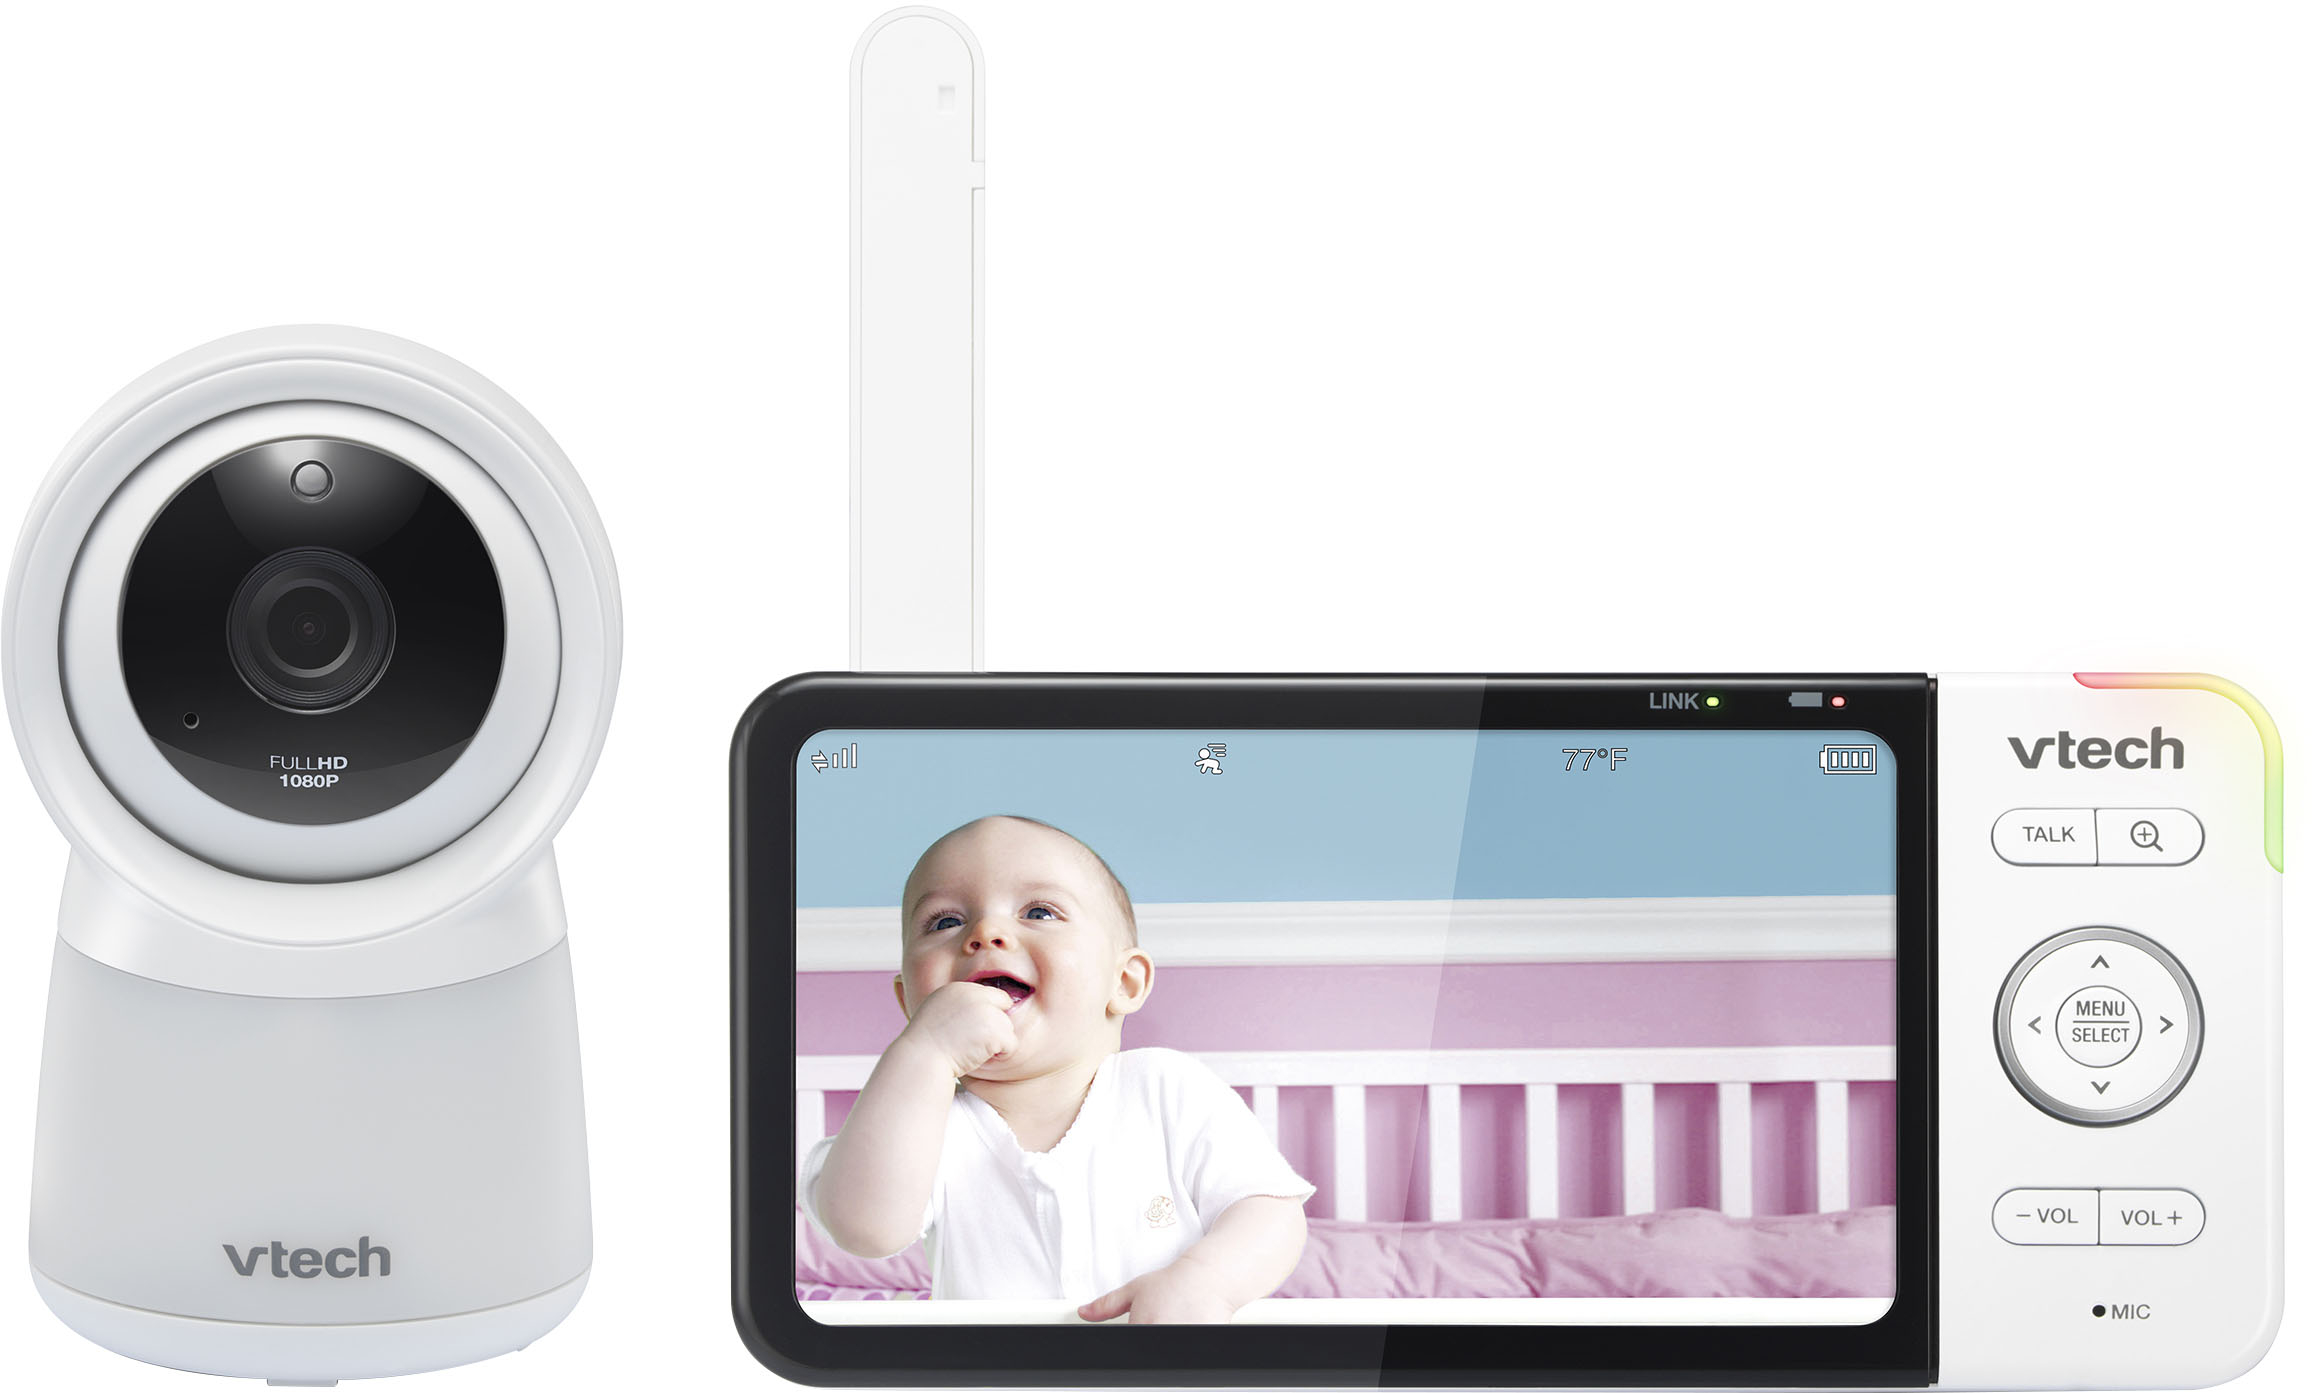 Wi-Fi Remote Access 2 Camera Video Baby Monitor with 7 display